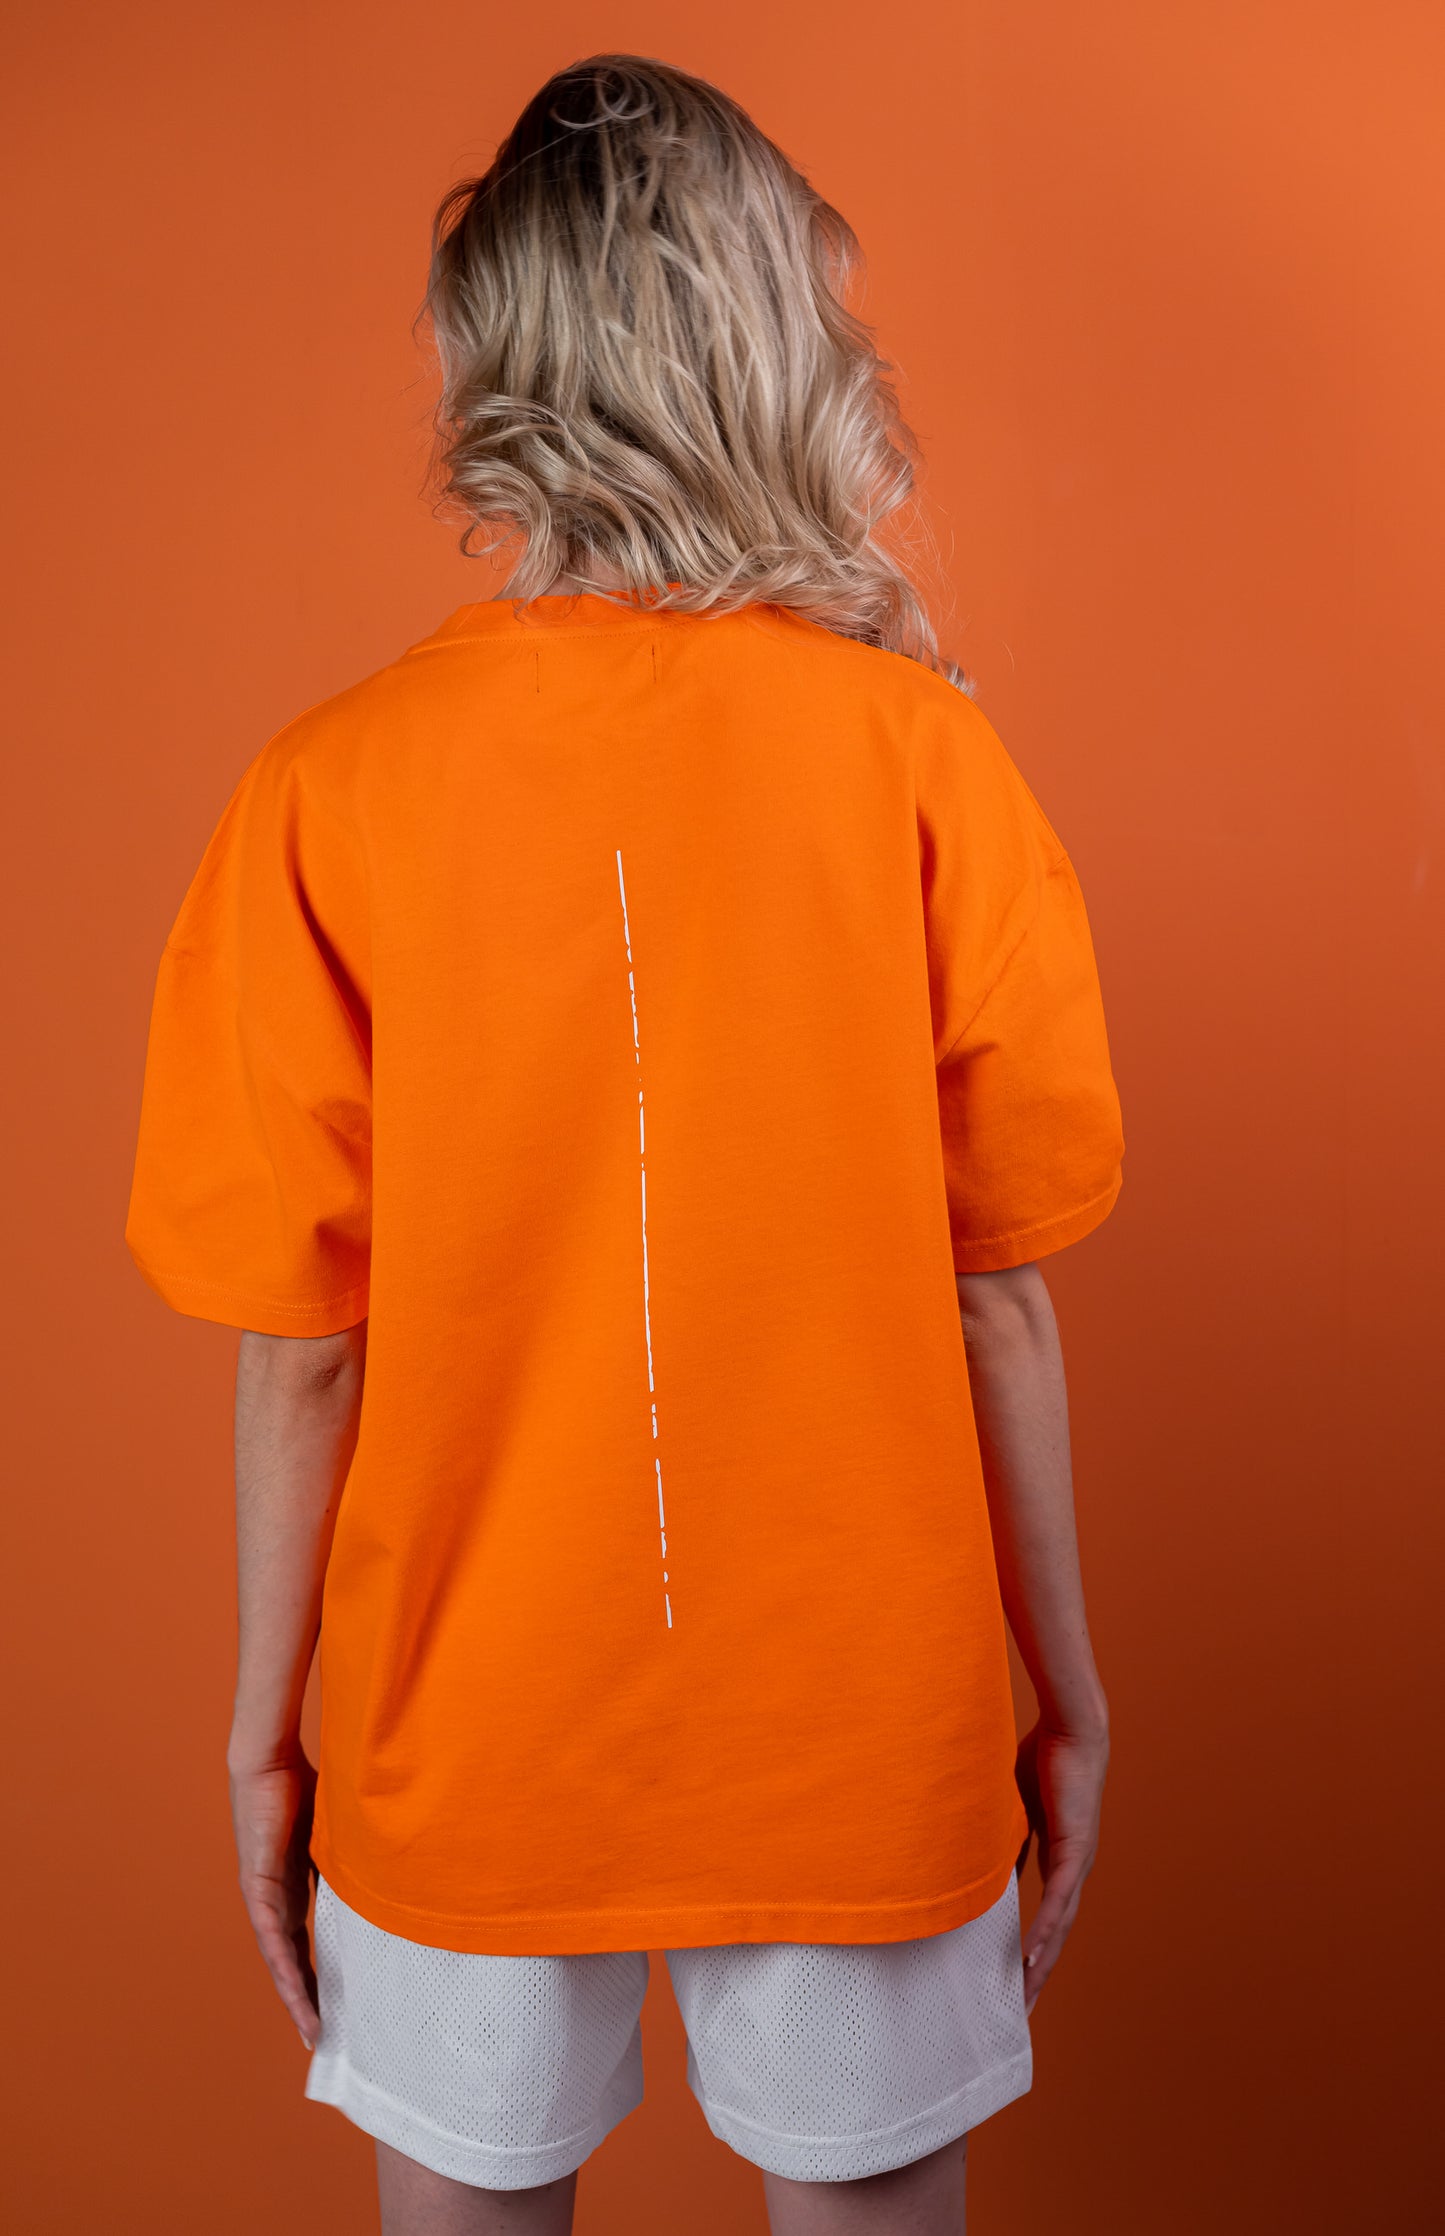 Model wearing a orange oversize tshirt with white trace on the back #